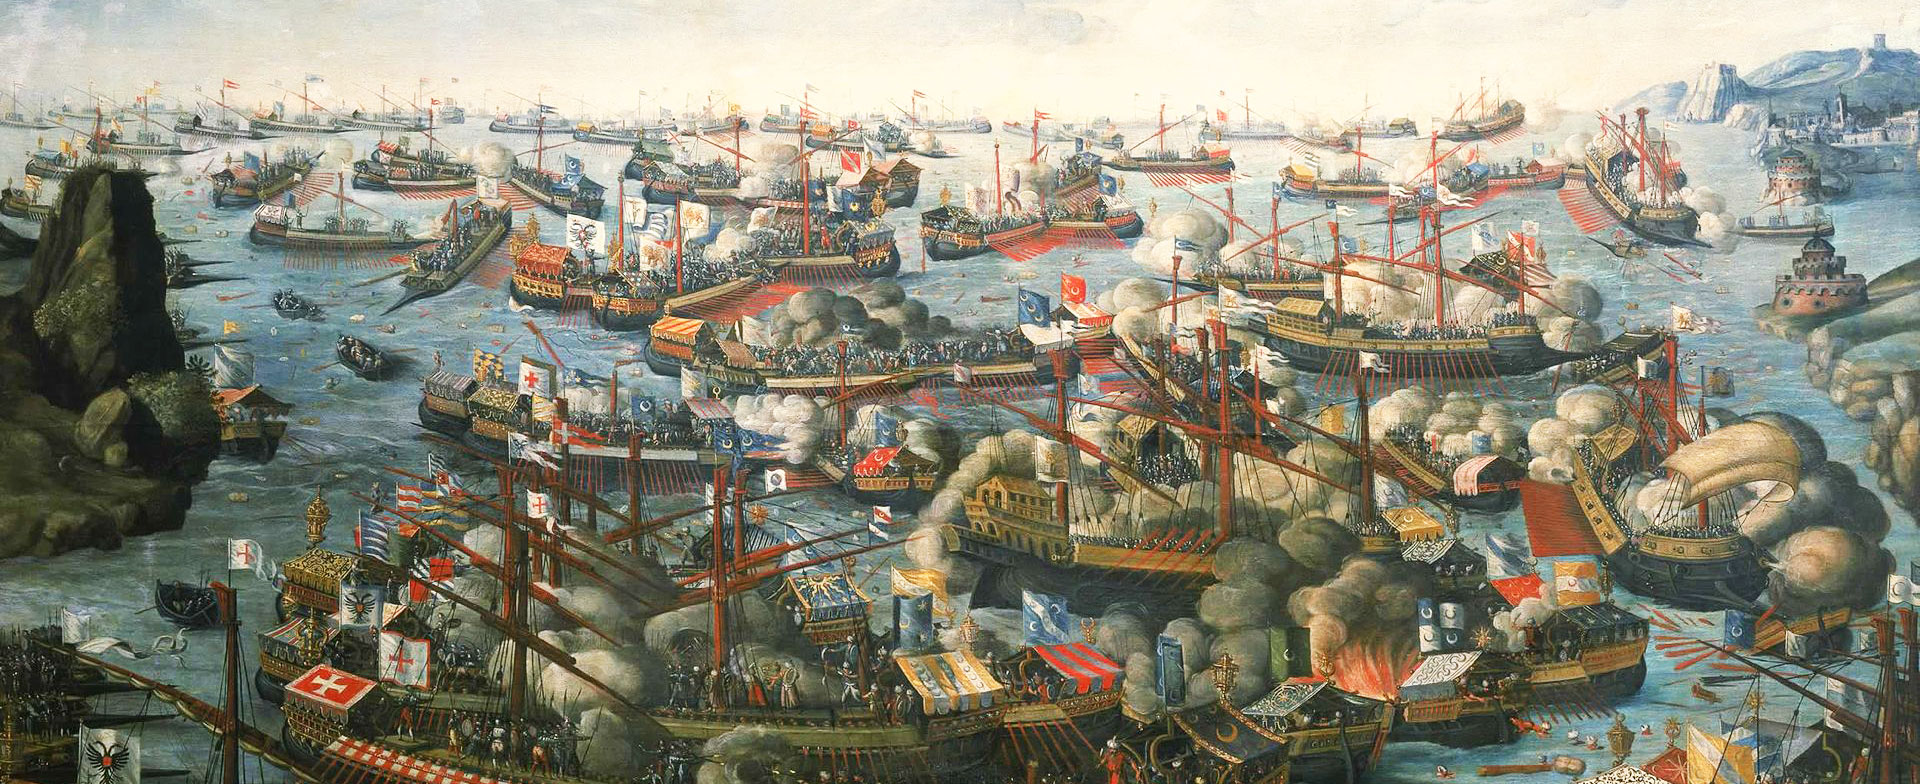 Paiting of the Battle of Lepanto 1571